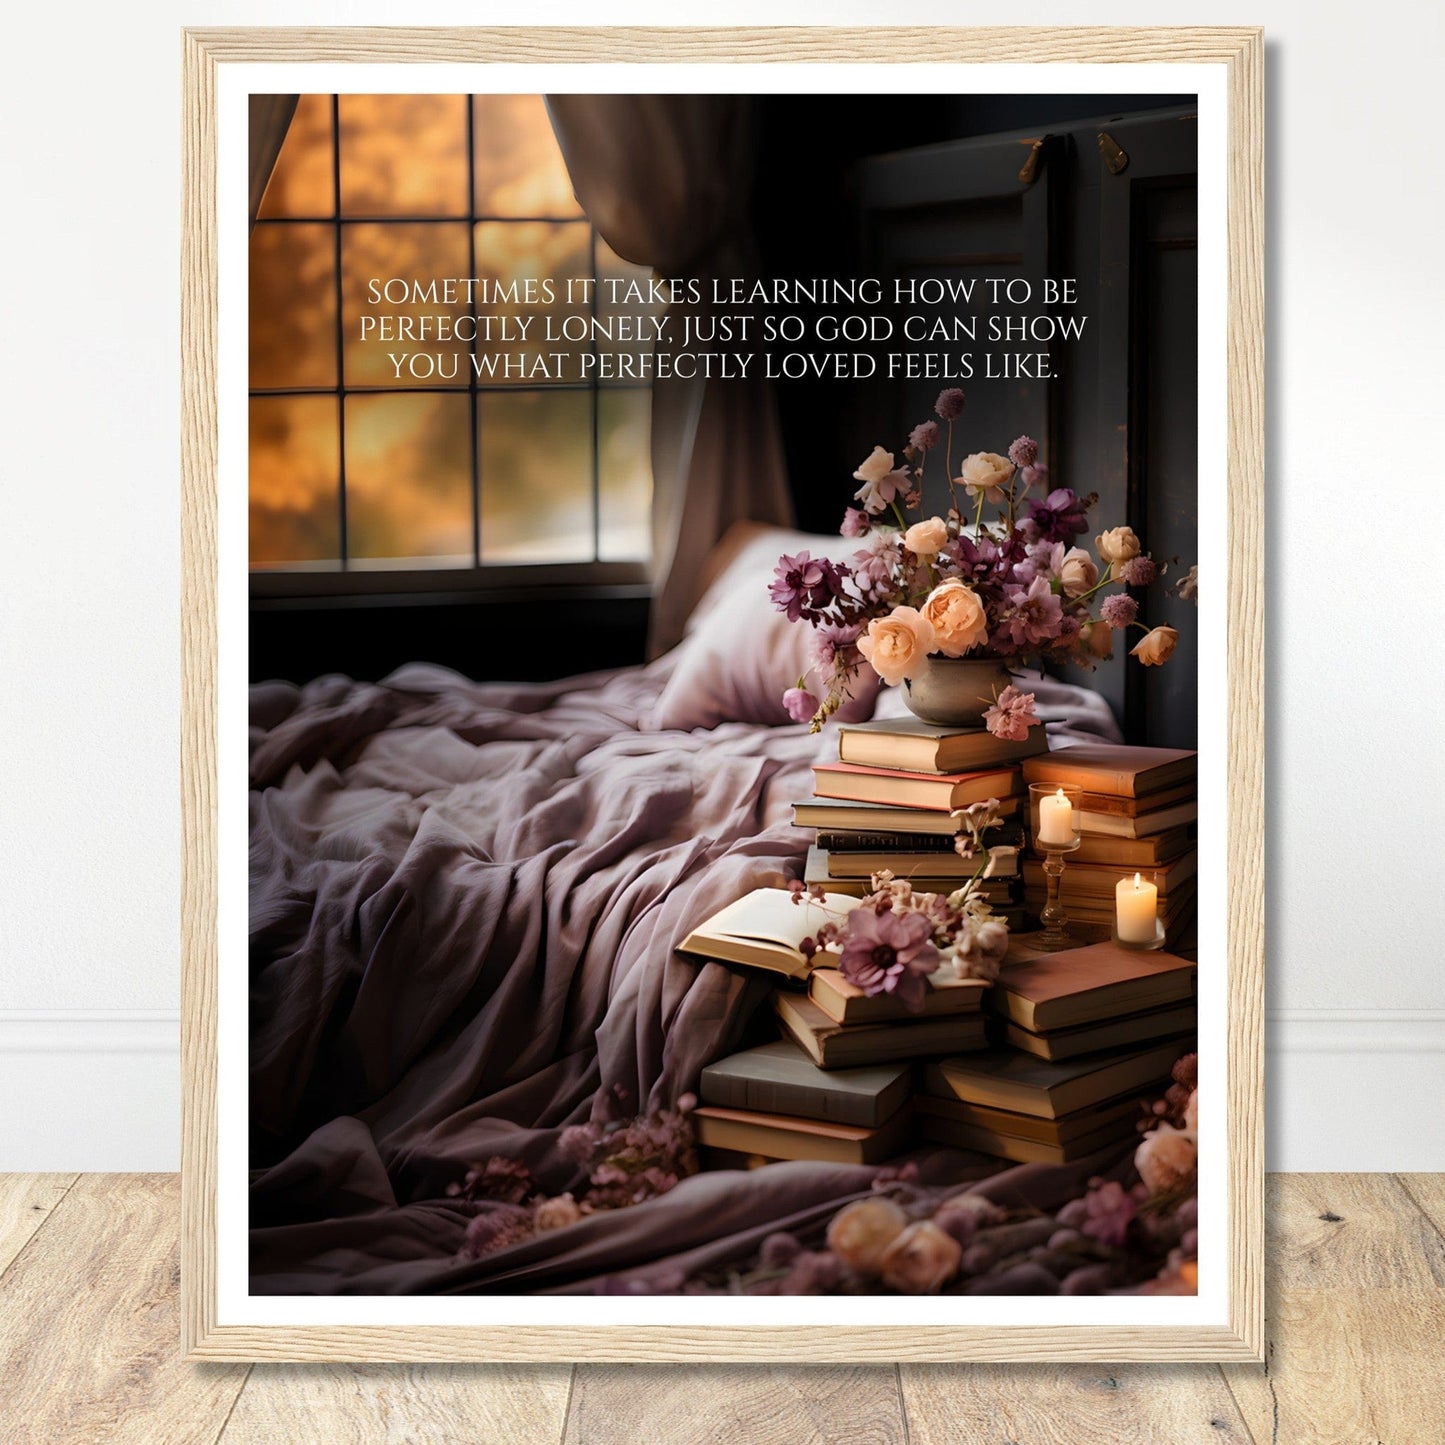 Coffee With My Father Print Material 40x50 cm / 16x20″ / Wood frame Framed Template